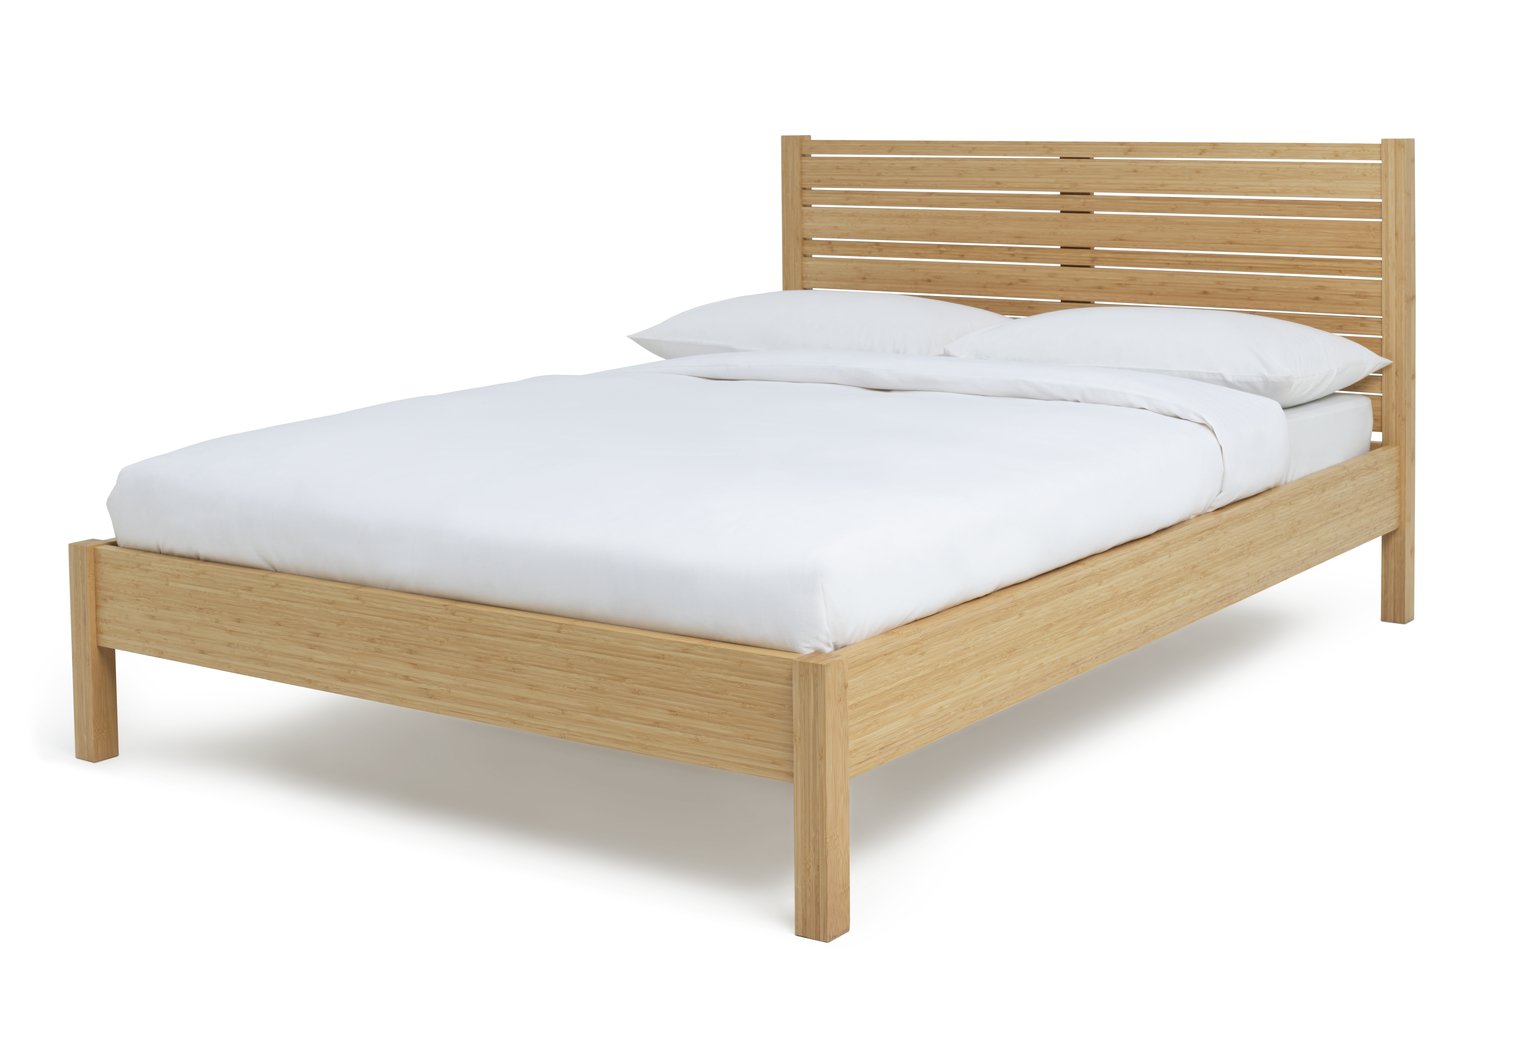 Habitat Eave Bamboo Double Bed Frame - Natural